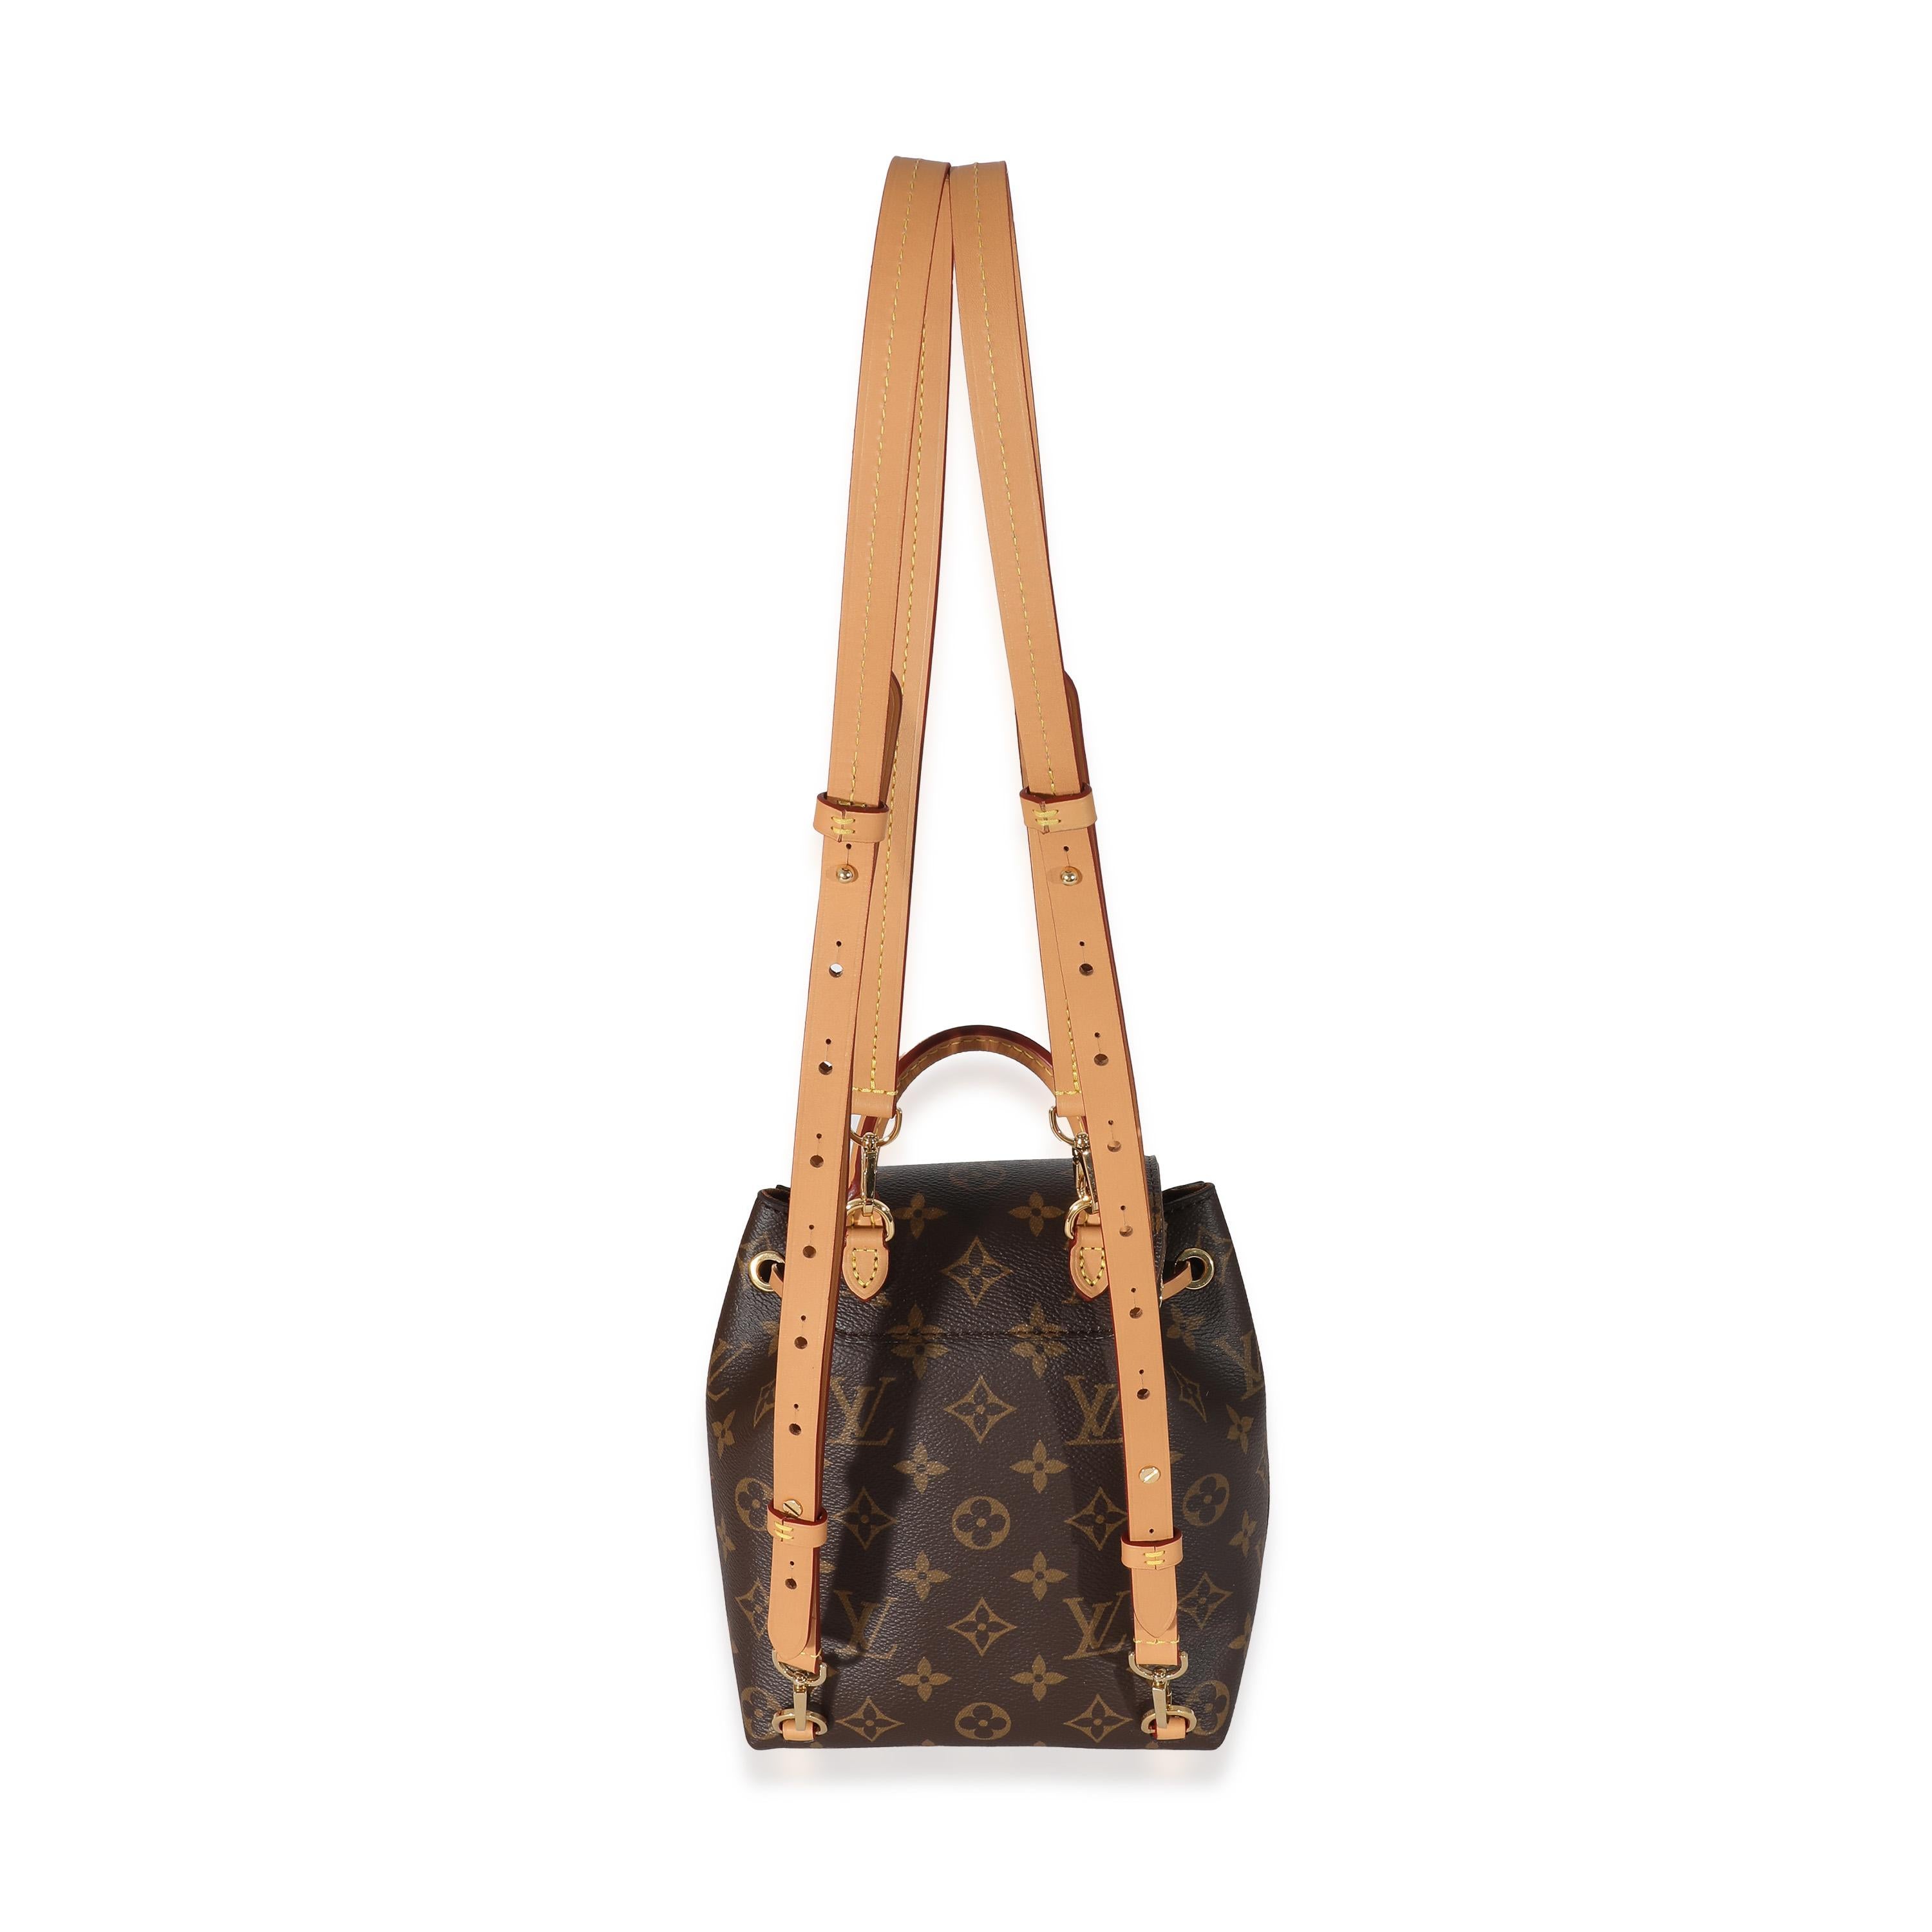 Listing Title: Louis Vuitton Monogram Canvas Montsouris BB 
SKU: 134038
MSRP: 2640.00 USD
Condition: Pre-owned 
Handbag Condition: Excellent
Condition Comments: Item is in excellent condition and displays light signs of wear. Exterior faint